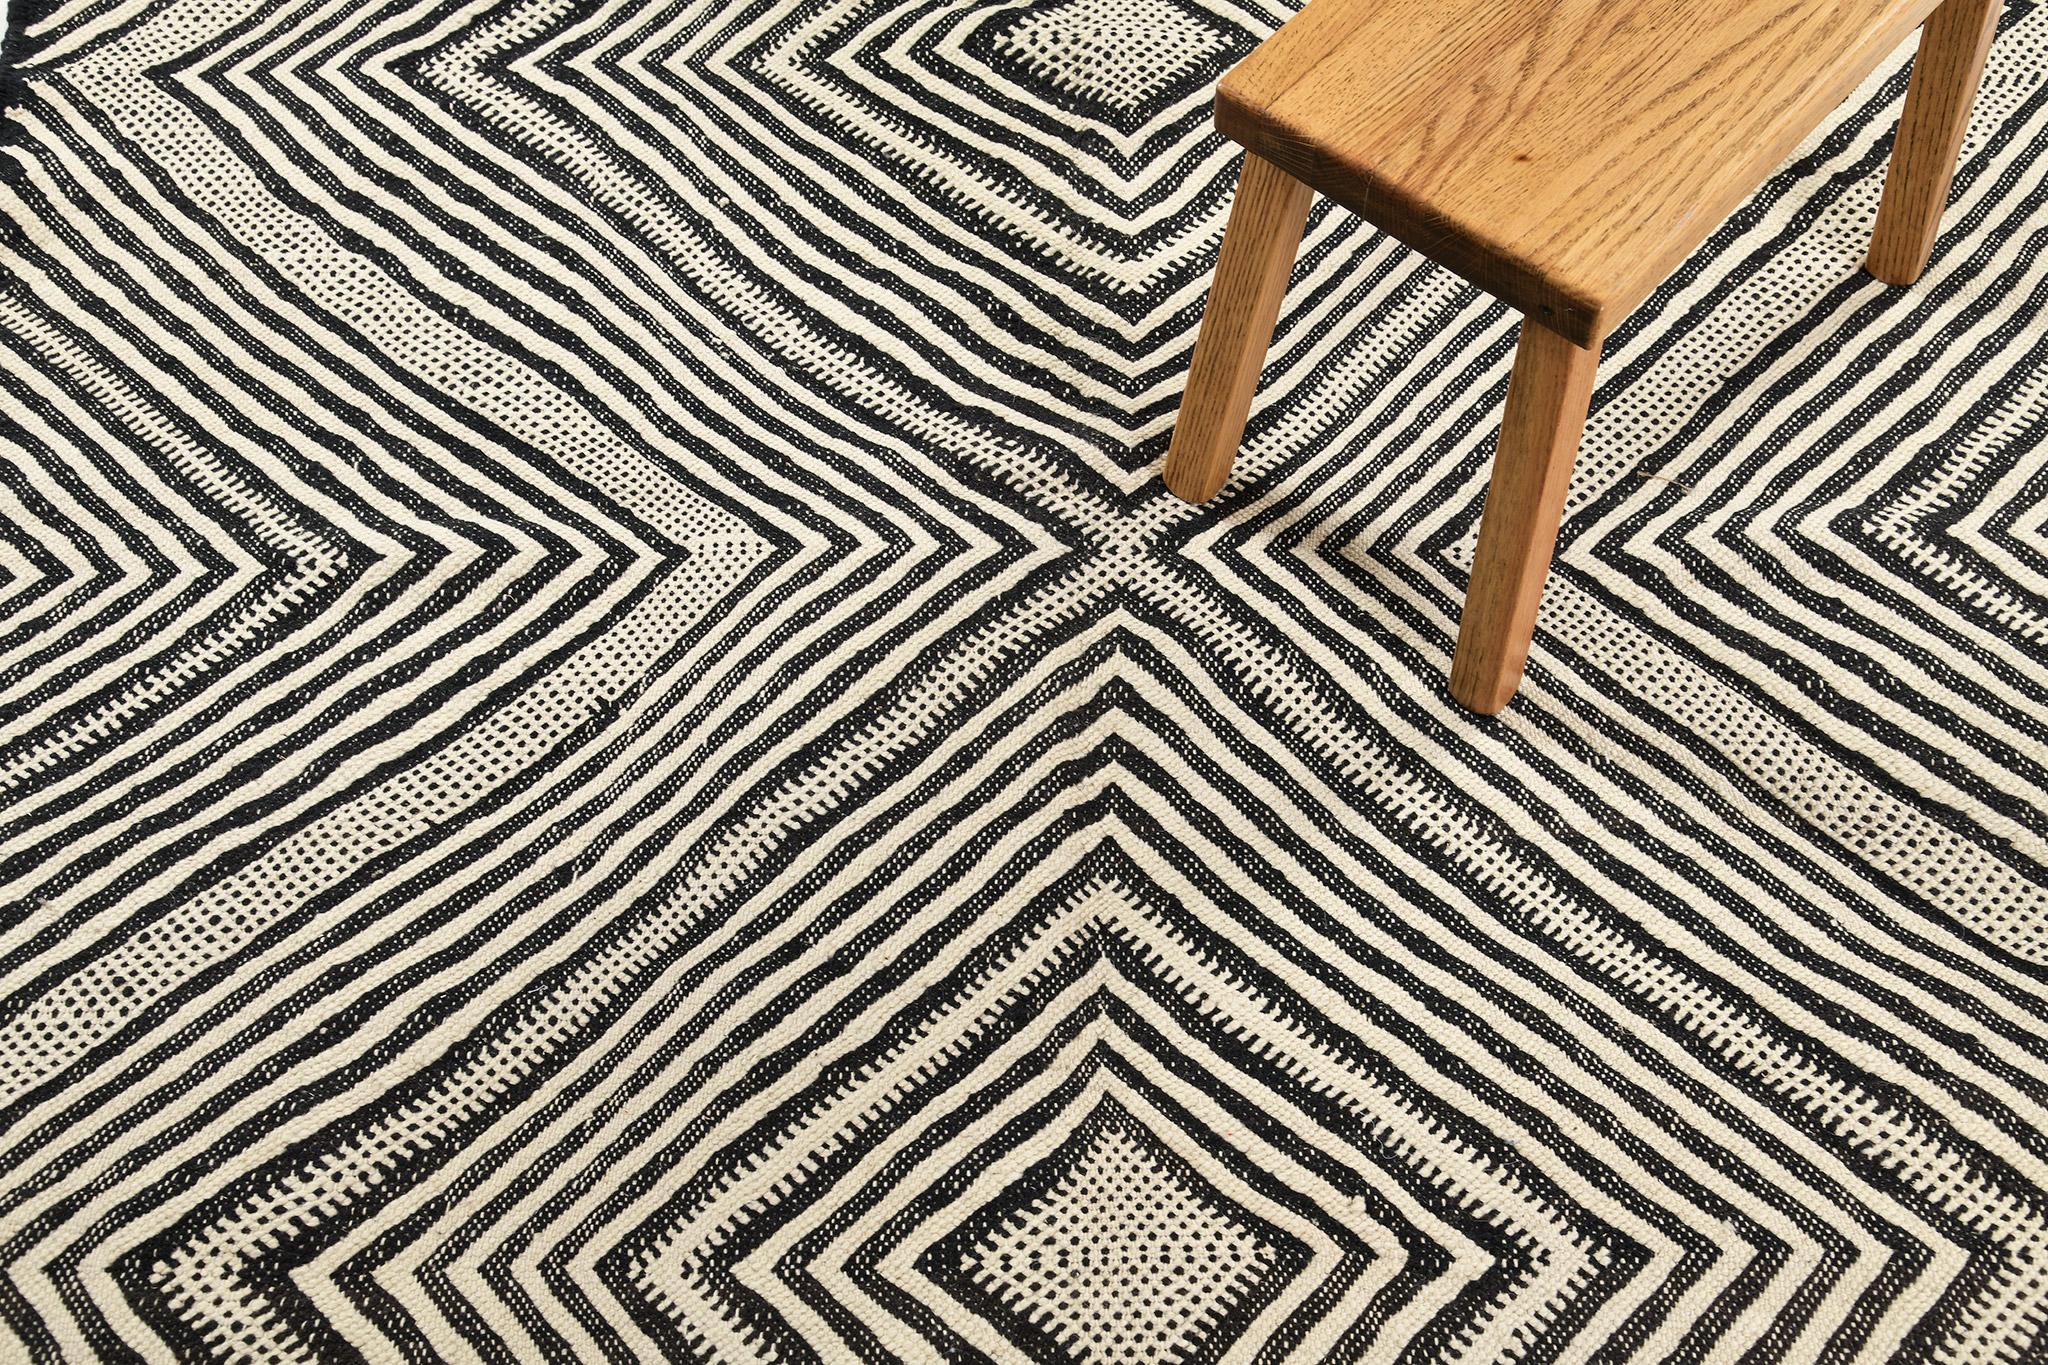 This incredible Moroccan Rug features an optical illusion creating a continuous diamond pattern that adds texture and flavor to the eyes of the guests. An effect that is the perfect complement to your home scenery with a minimalist accent